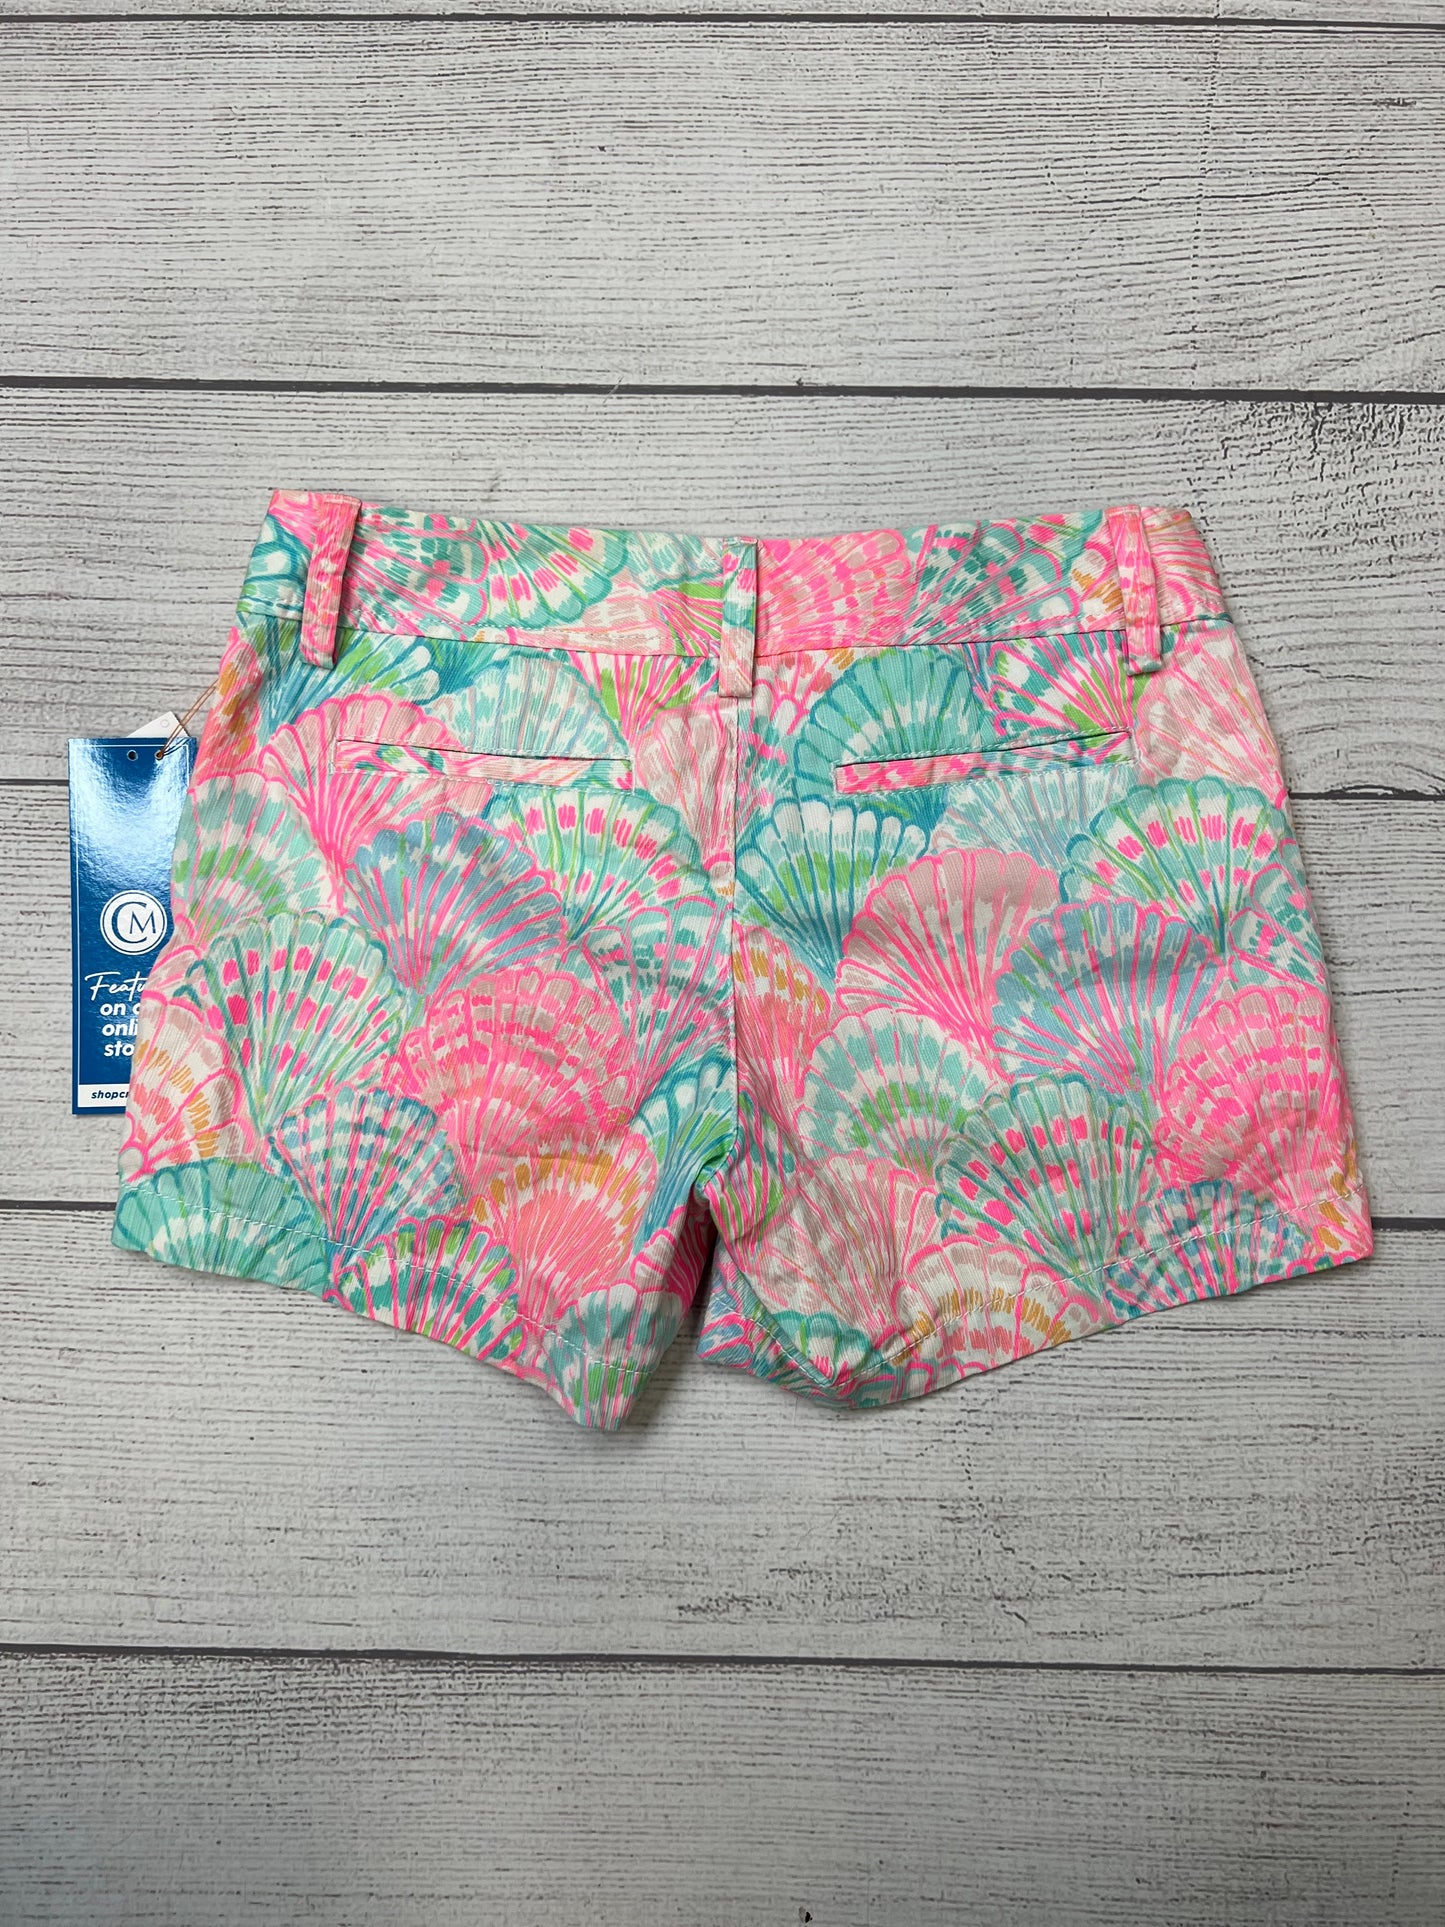 Multi-colored Shorts Lilly Pulitzer, Size 2